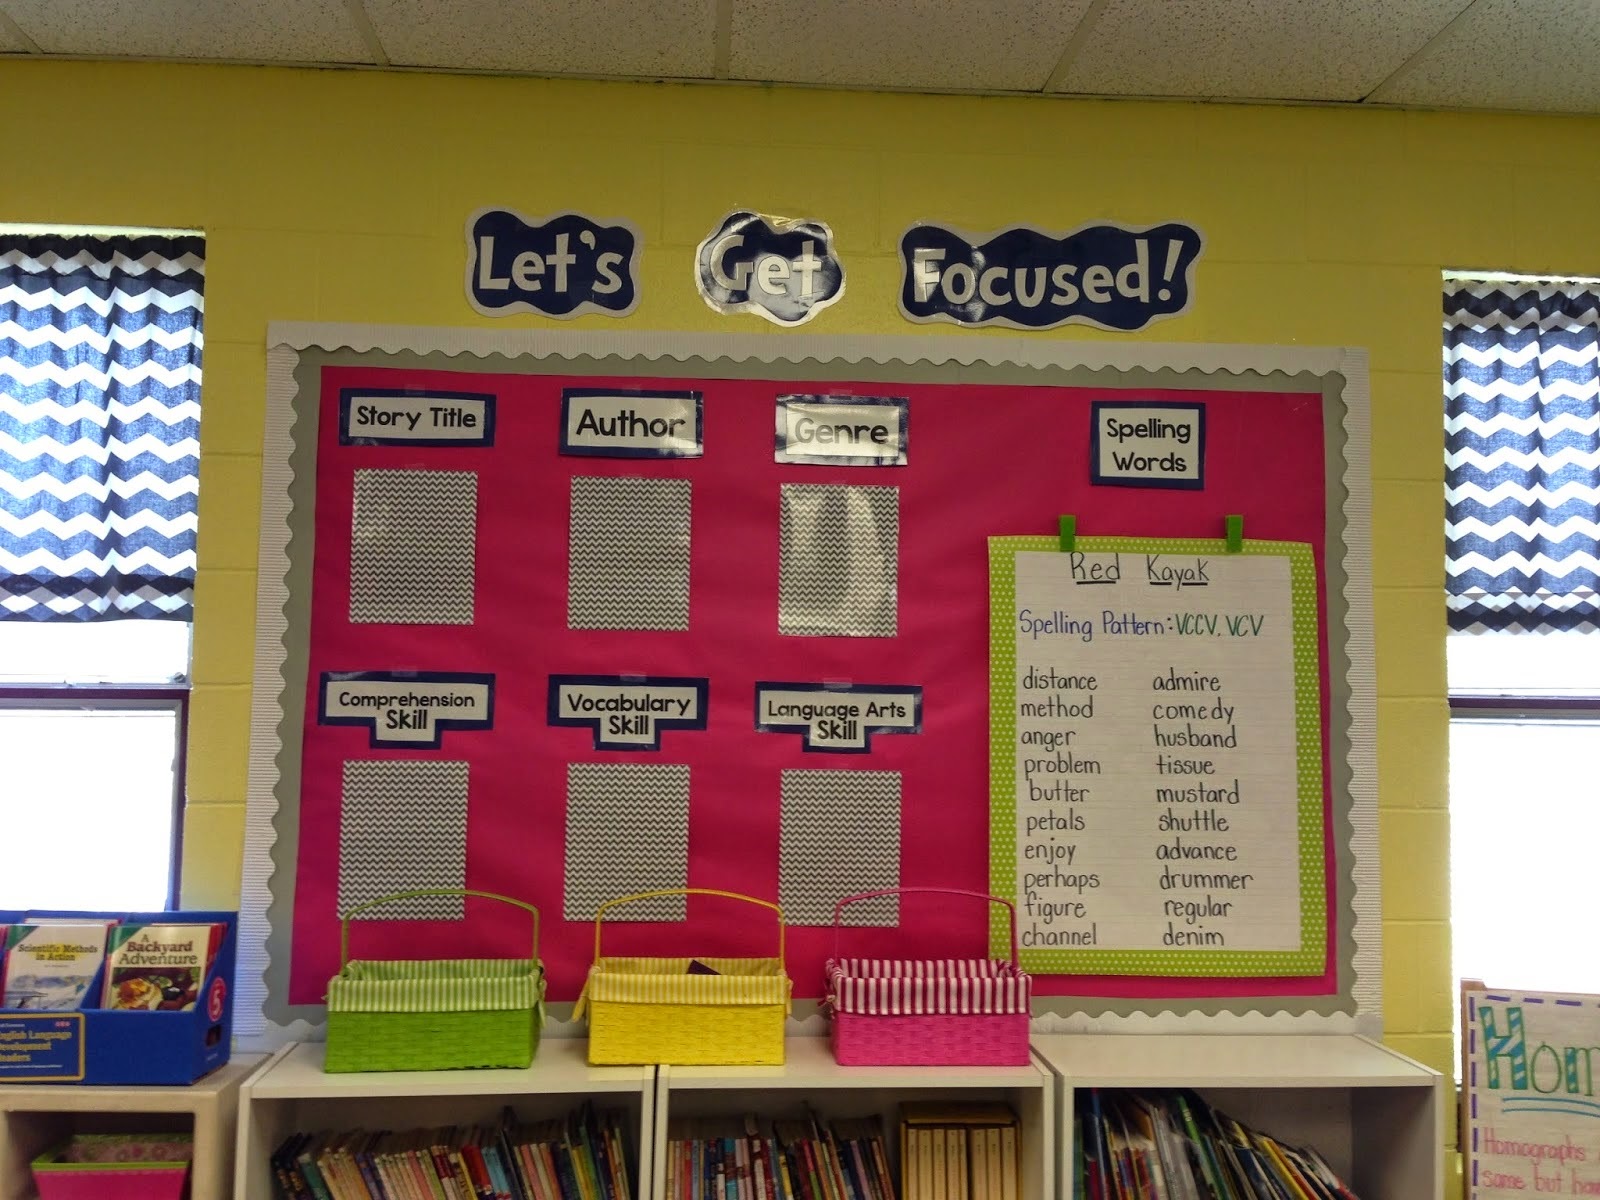 Classroom Focus Board/Objective Board to display what you're learning and share learning goals.